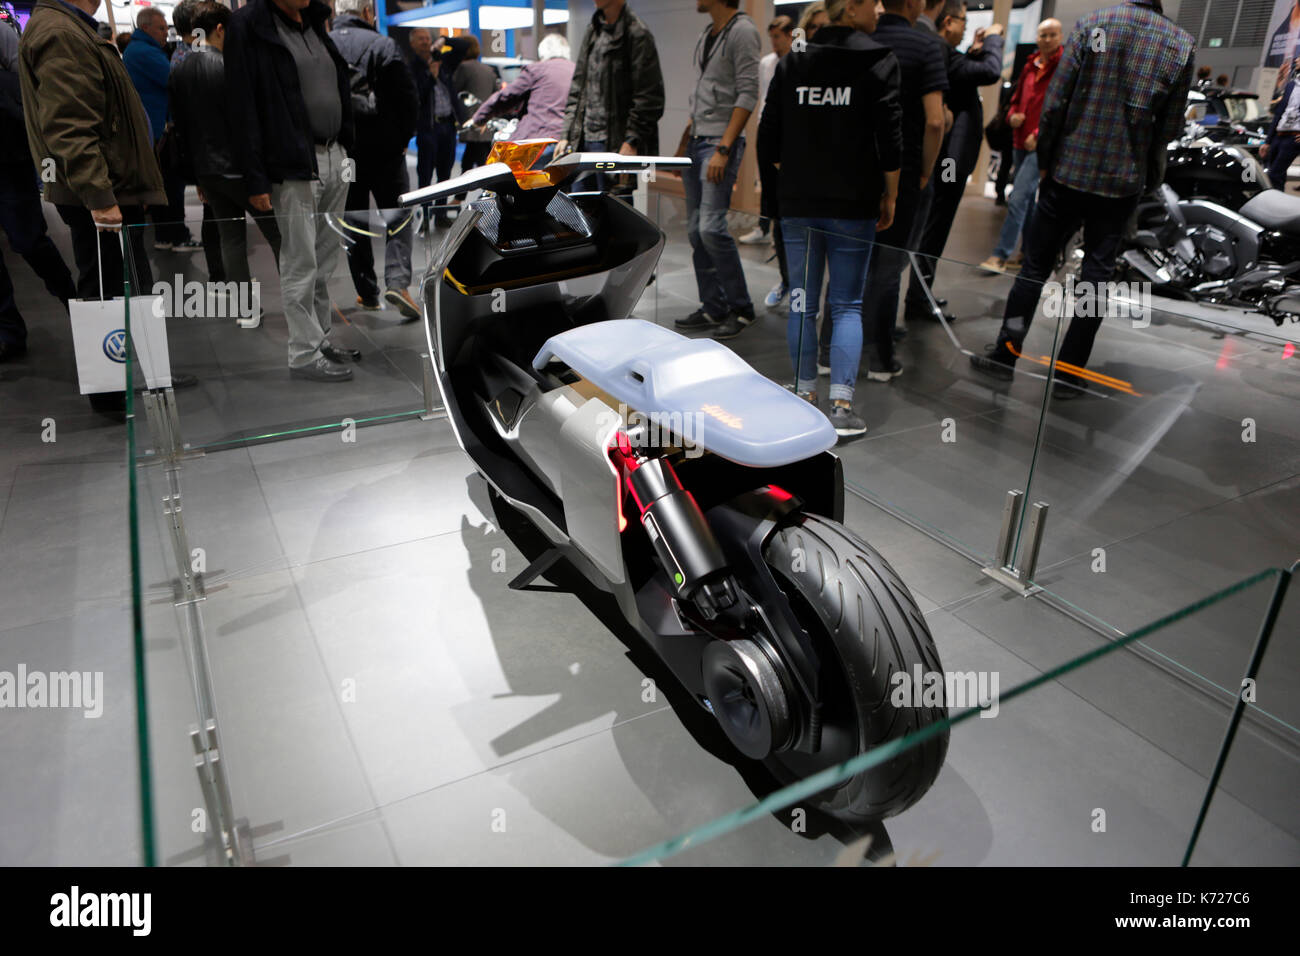 Bmw Motorrad Concept Link High Resolution Stock Photography and Images -  Alamy